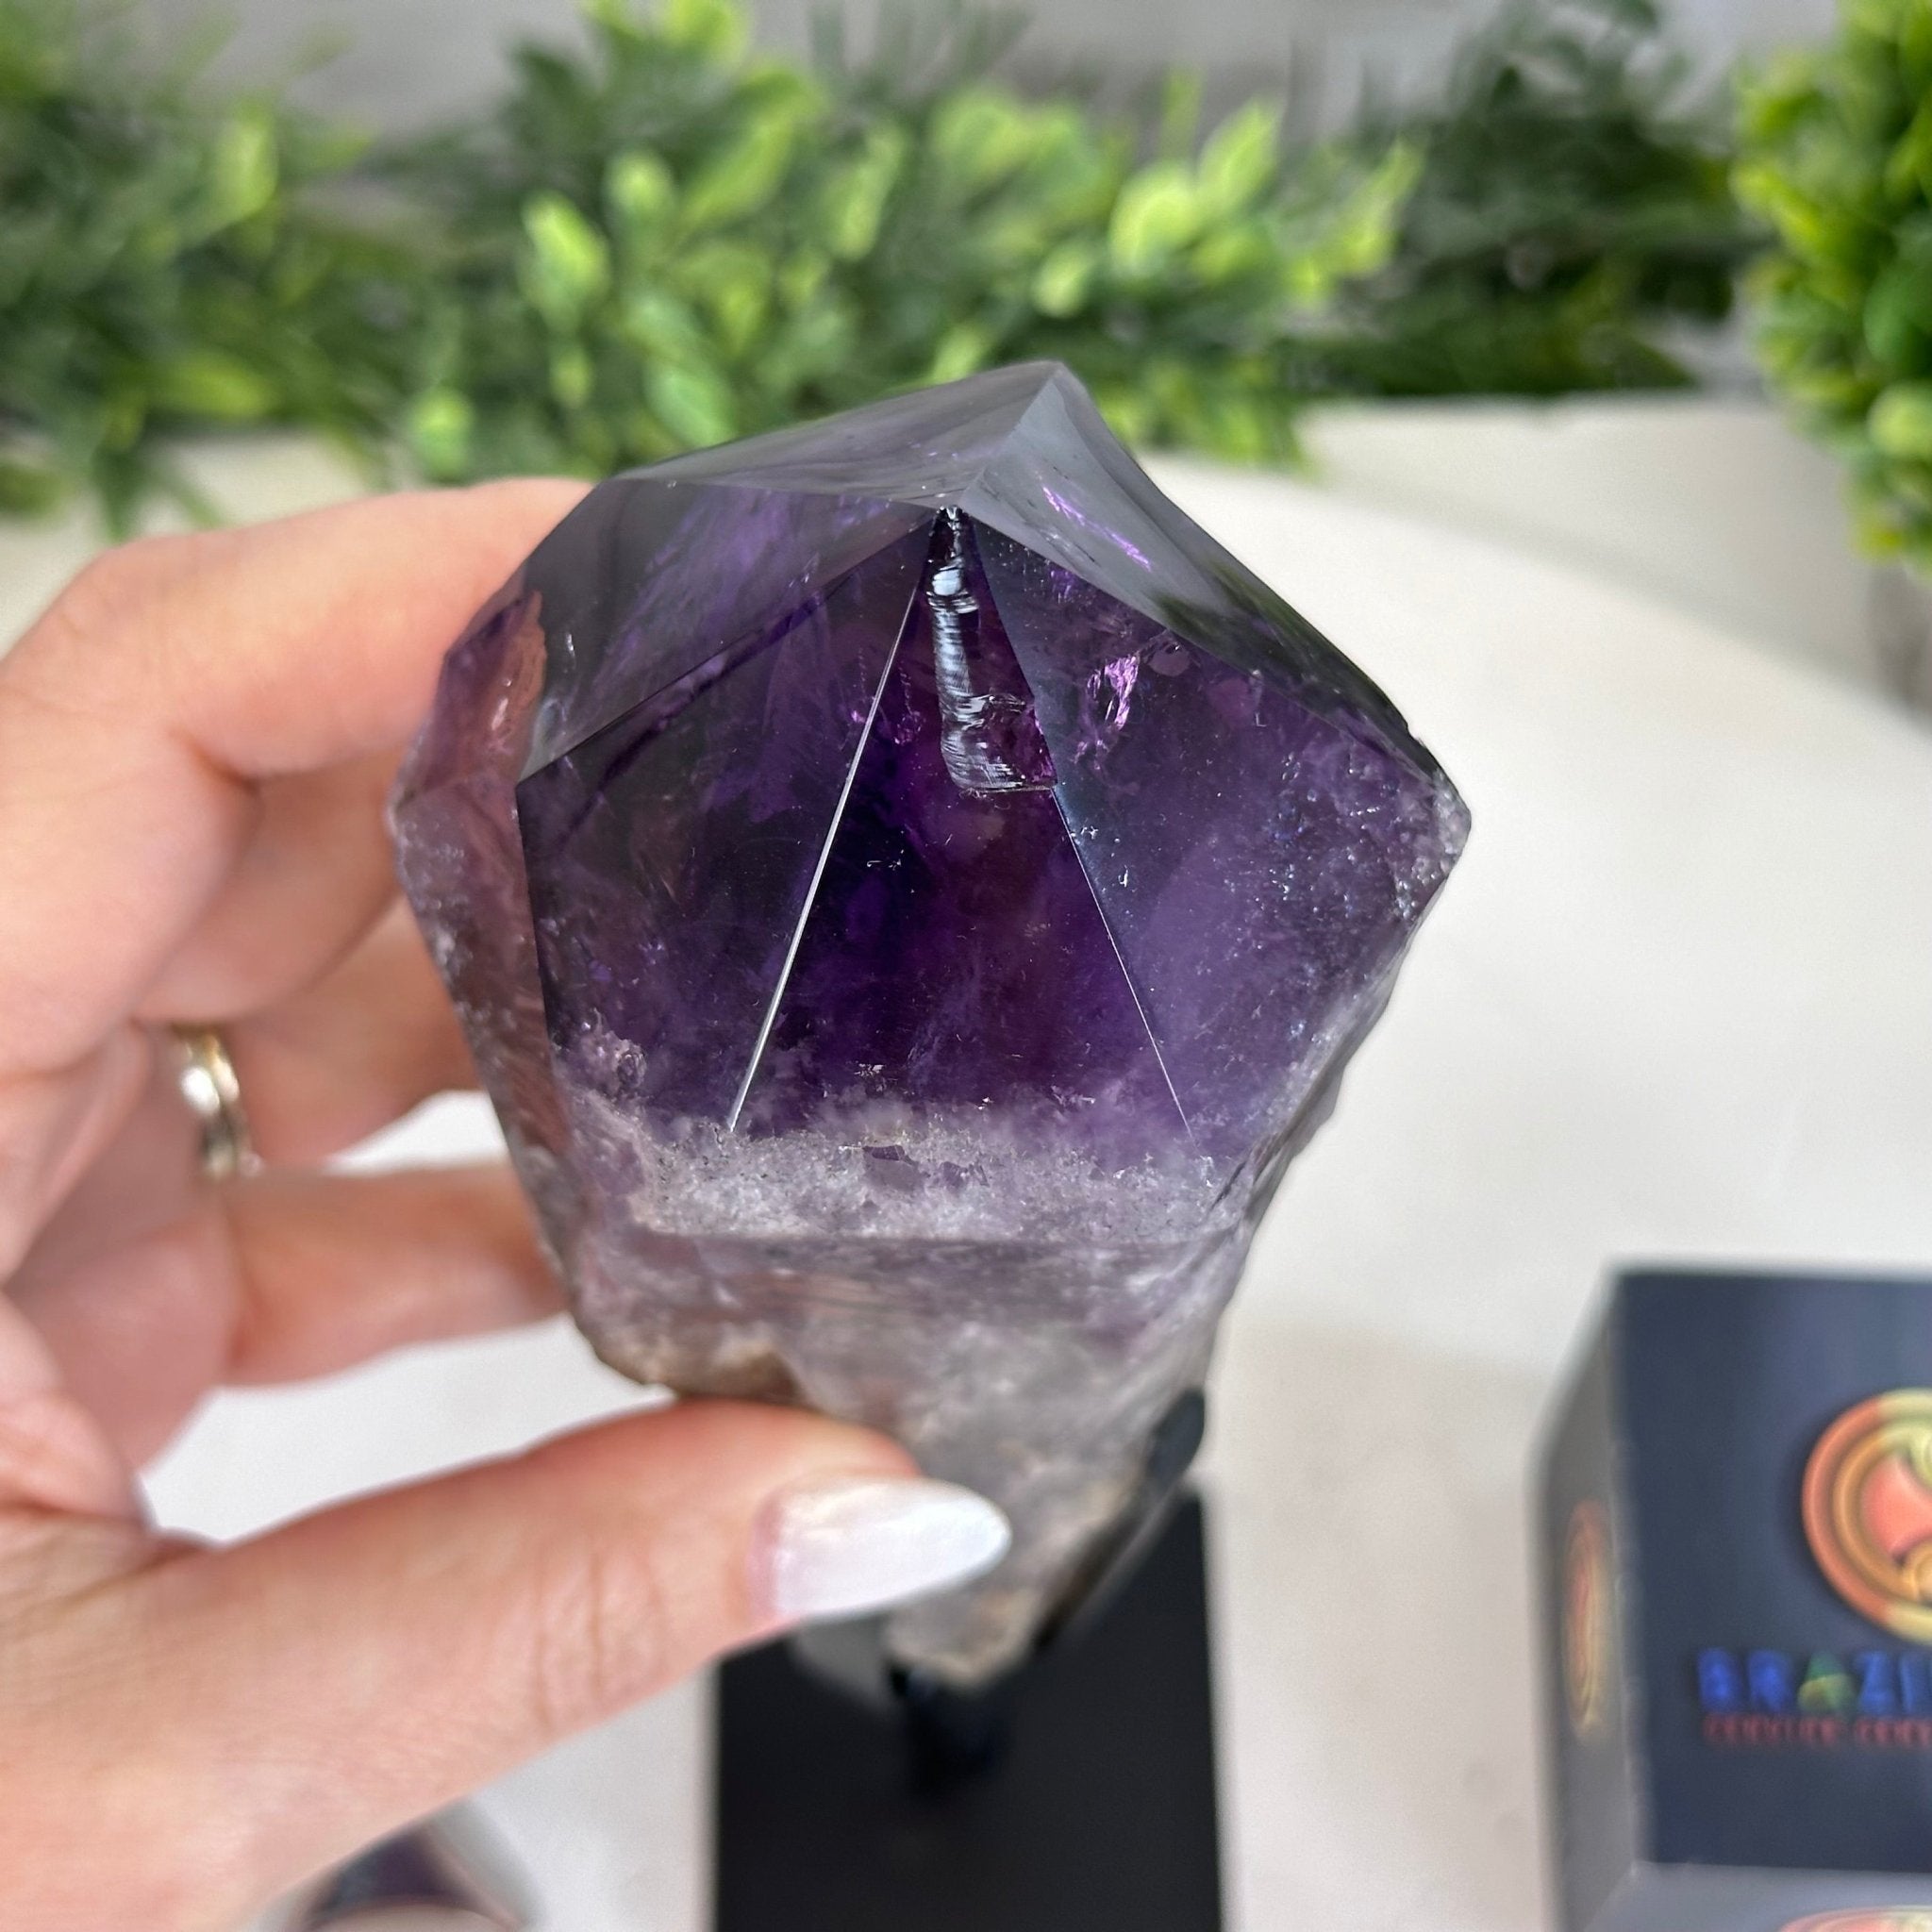 Super Quality Amethyst Wand on a Metal Stand, 1.9 lbs & 10.4" Tall #3123AM-007 - Brazil GemsBrazil GemsSuper Quality Amethyst Wand on a Metal Stand, 1.9 lbs & 10.4" Tall #3123AM-007Clusters on Fixed Bases3123AM-007